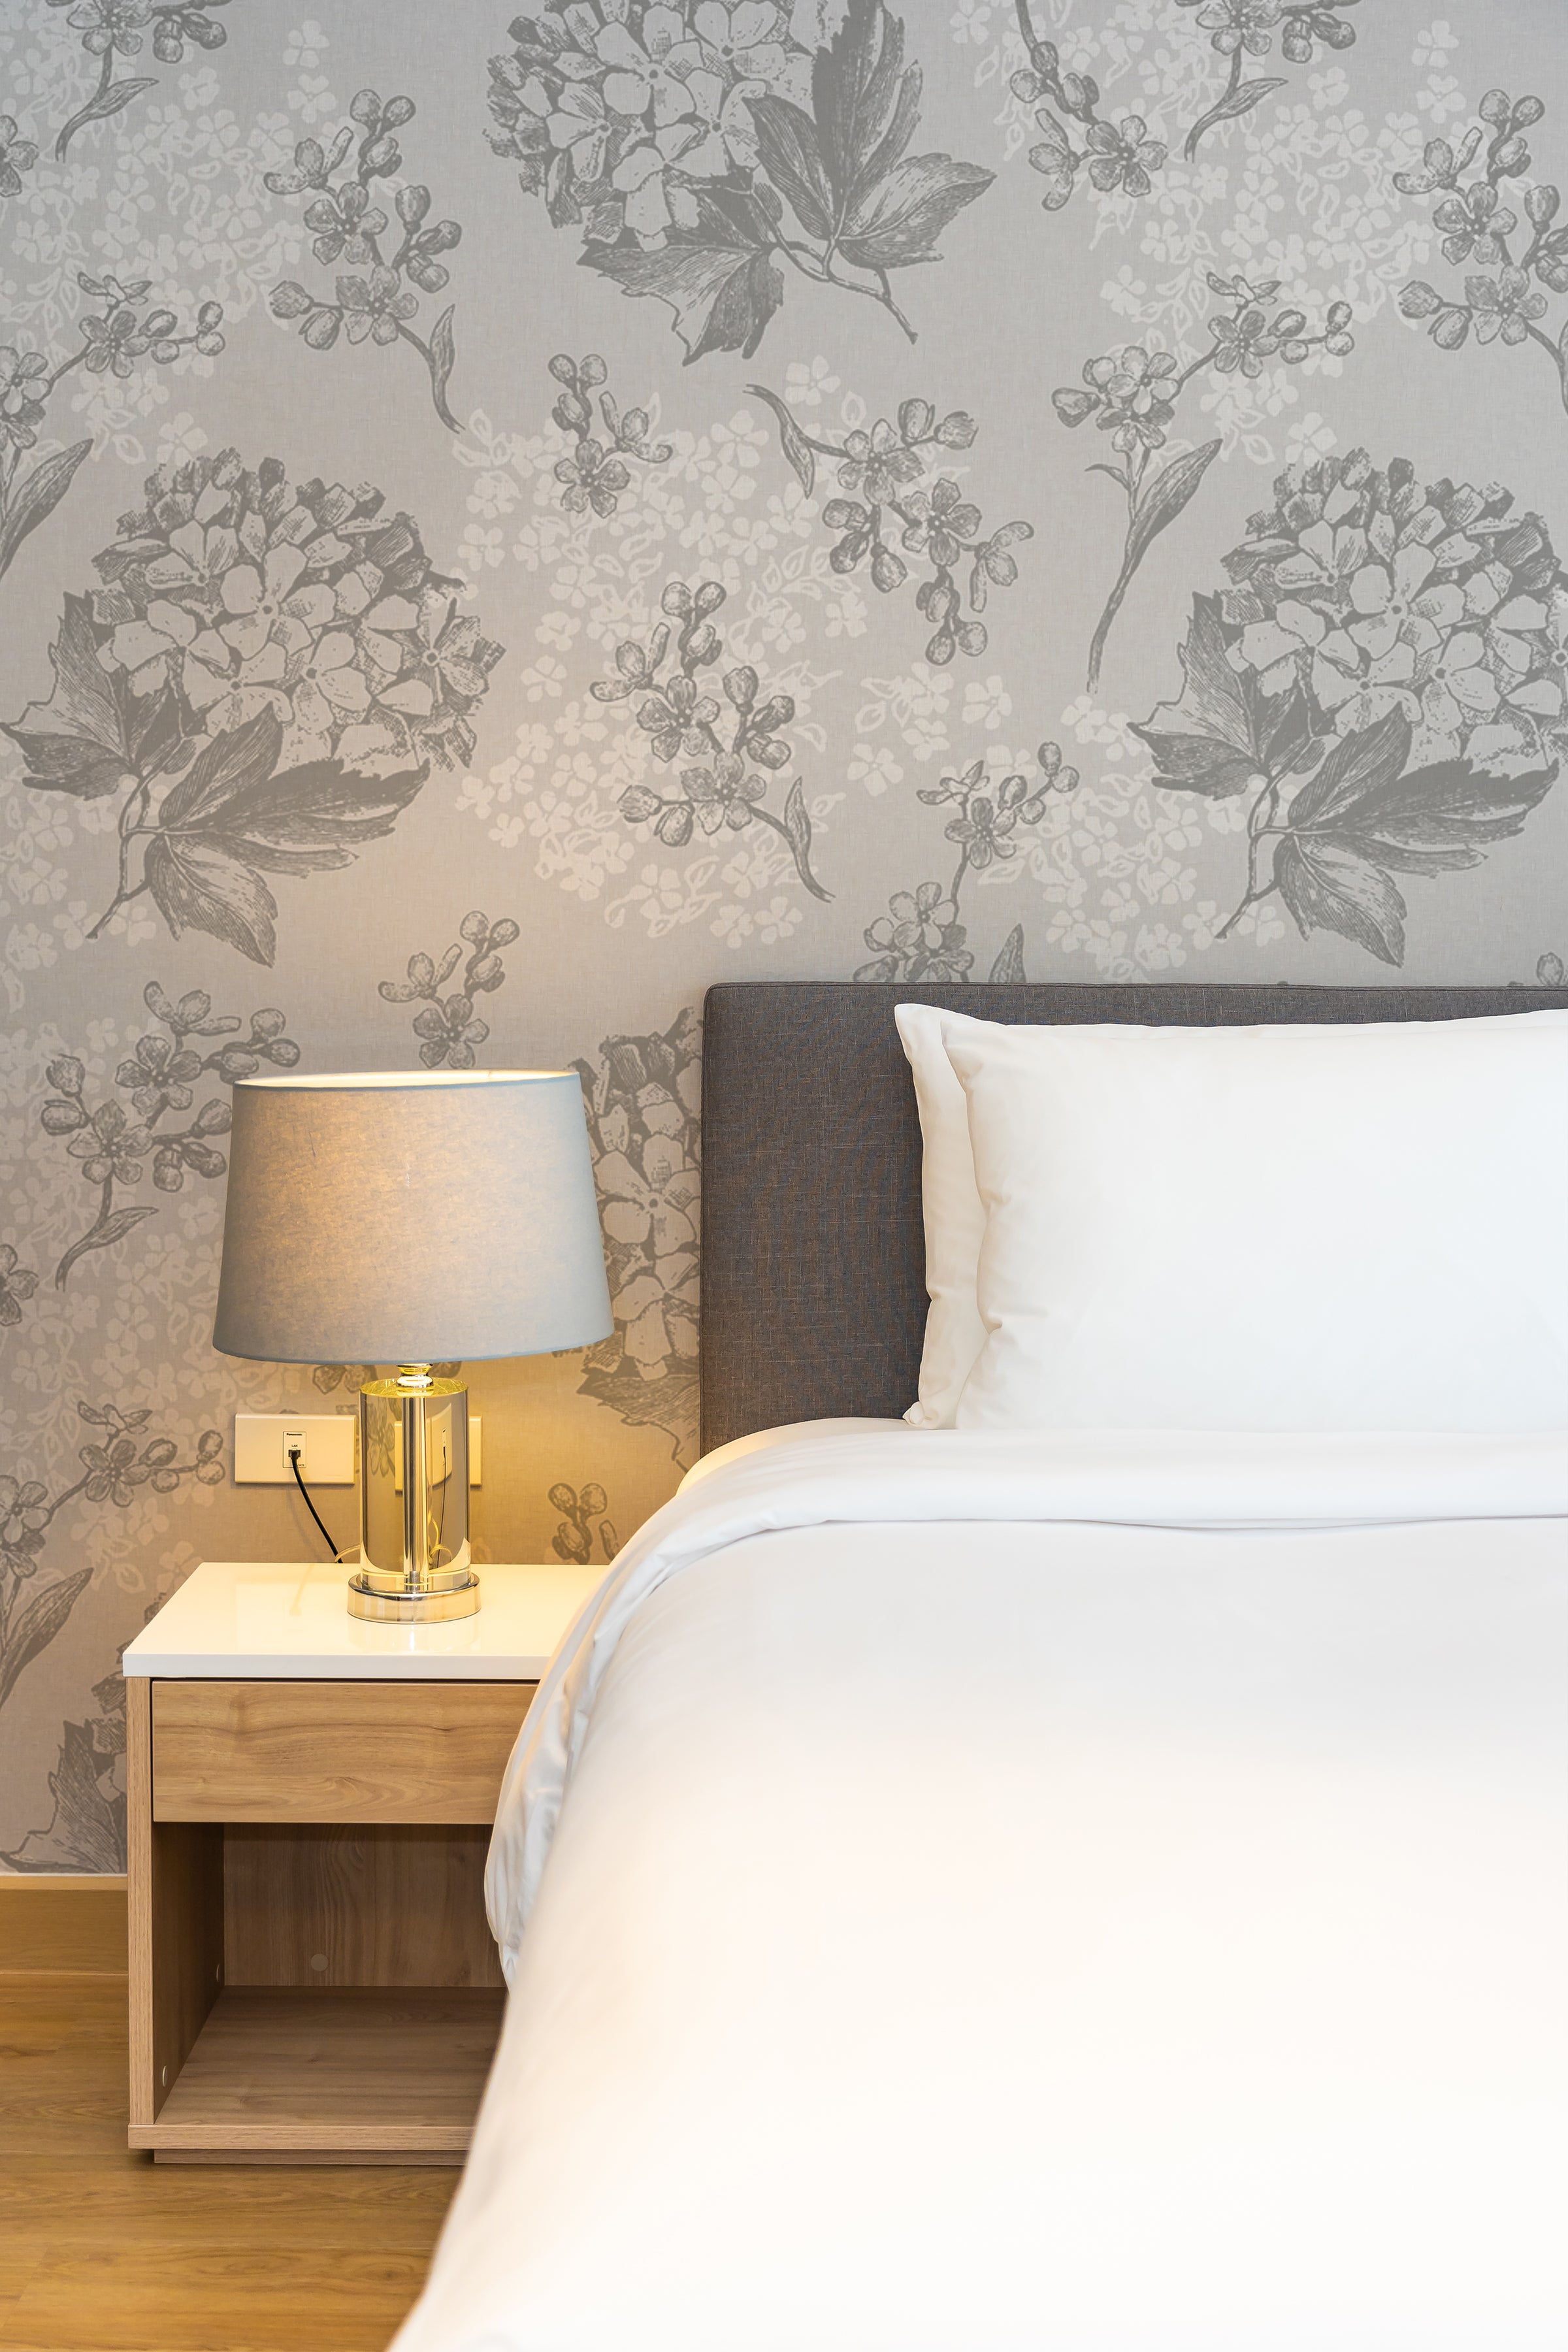 Chic bedroom featuring Modern Hydrangea Wallpaper with large grey floral patterns of hydrangeas on a muted background. The design complements a contemporary bedside setting with a sleek table lamp and minimalist furnishings, creating a tranquil and stylish ambiance.